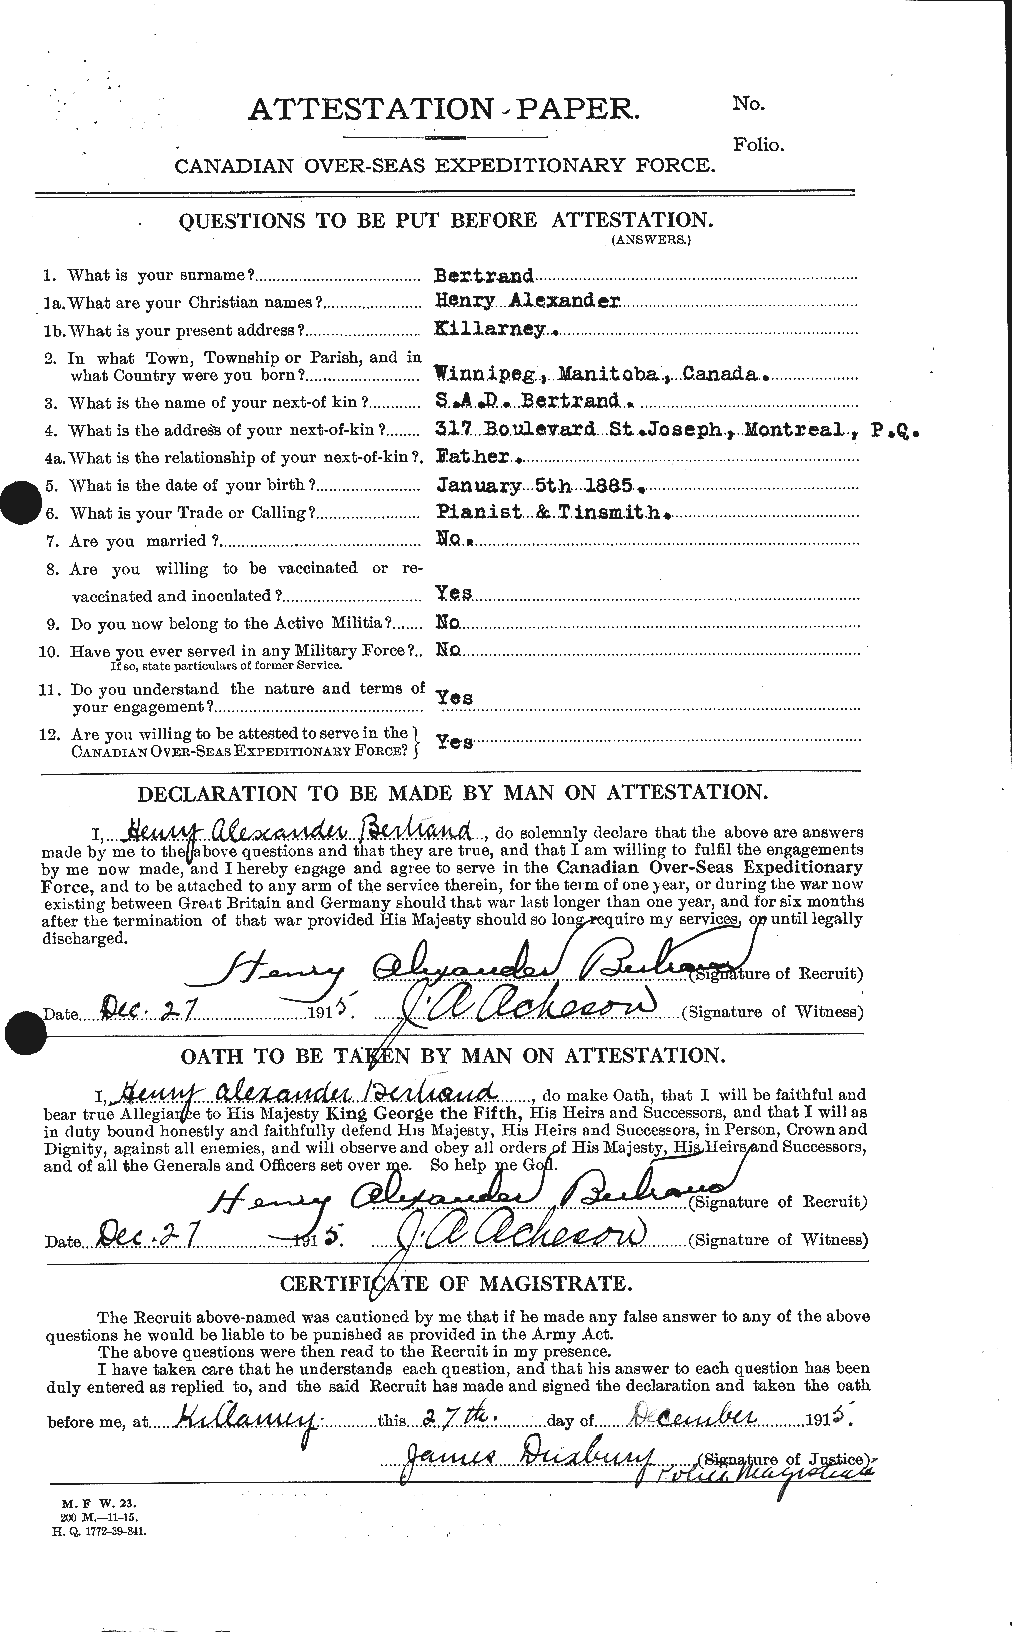 Personnel Records of the First World War - CEF 238779a